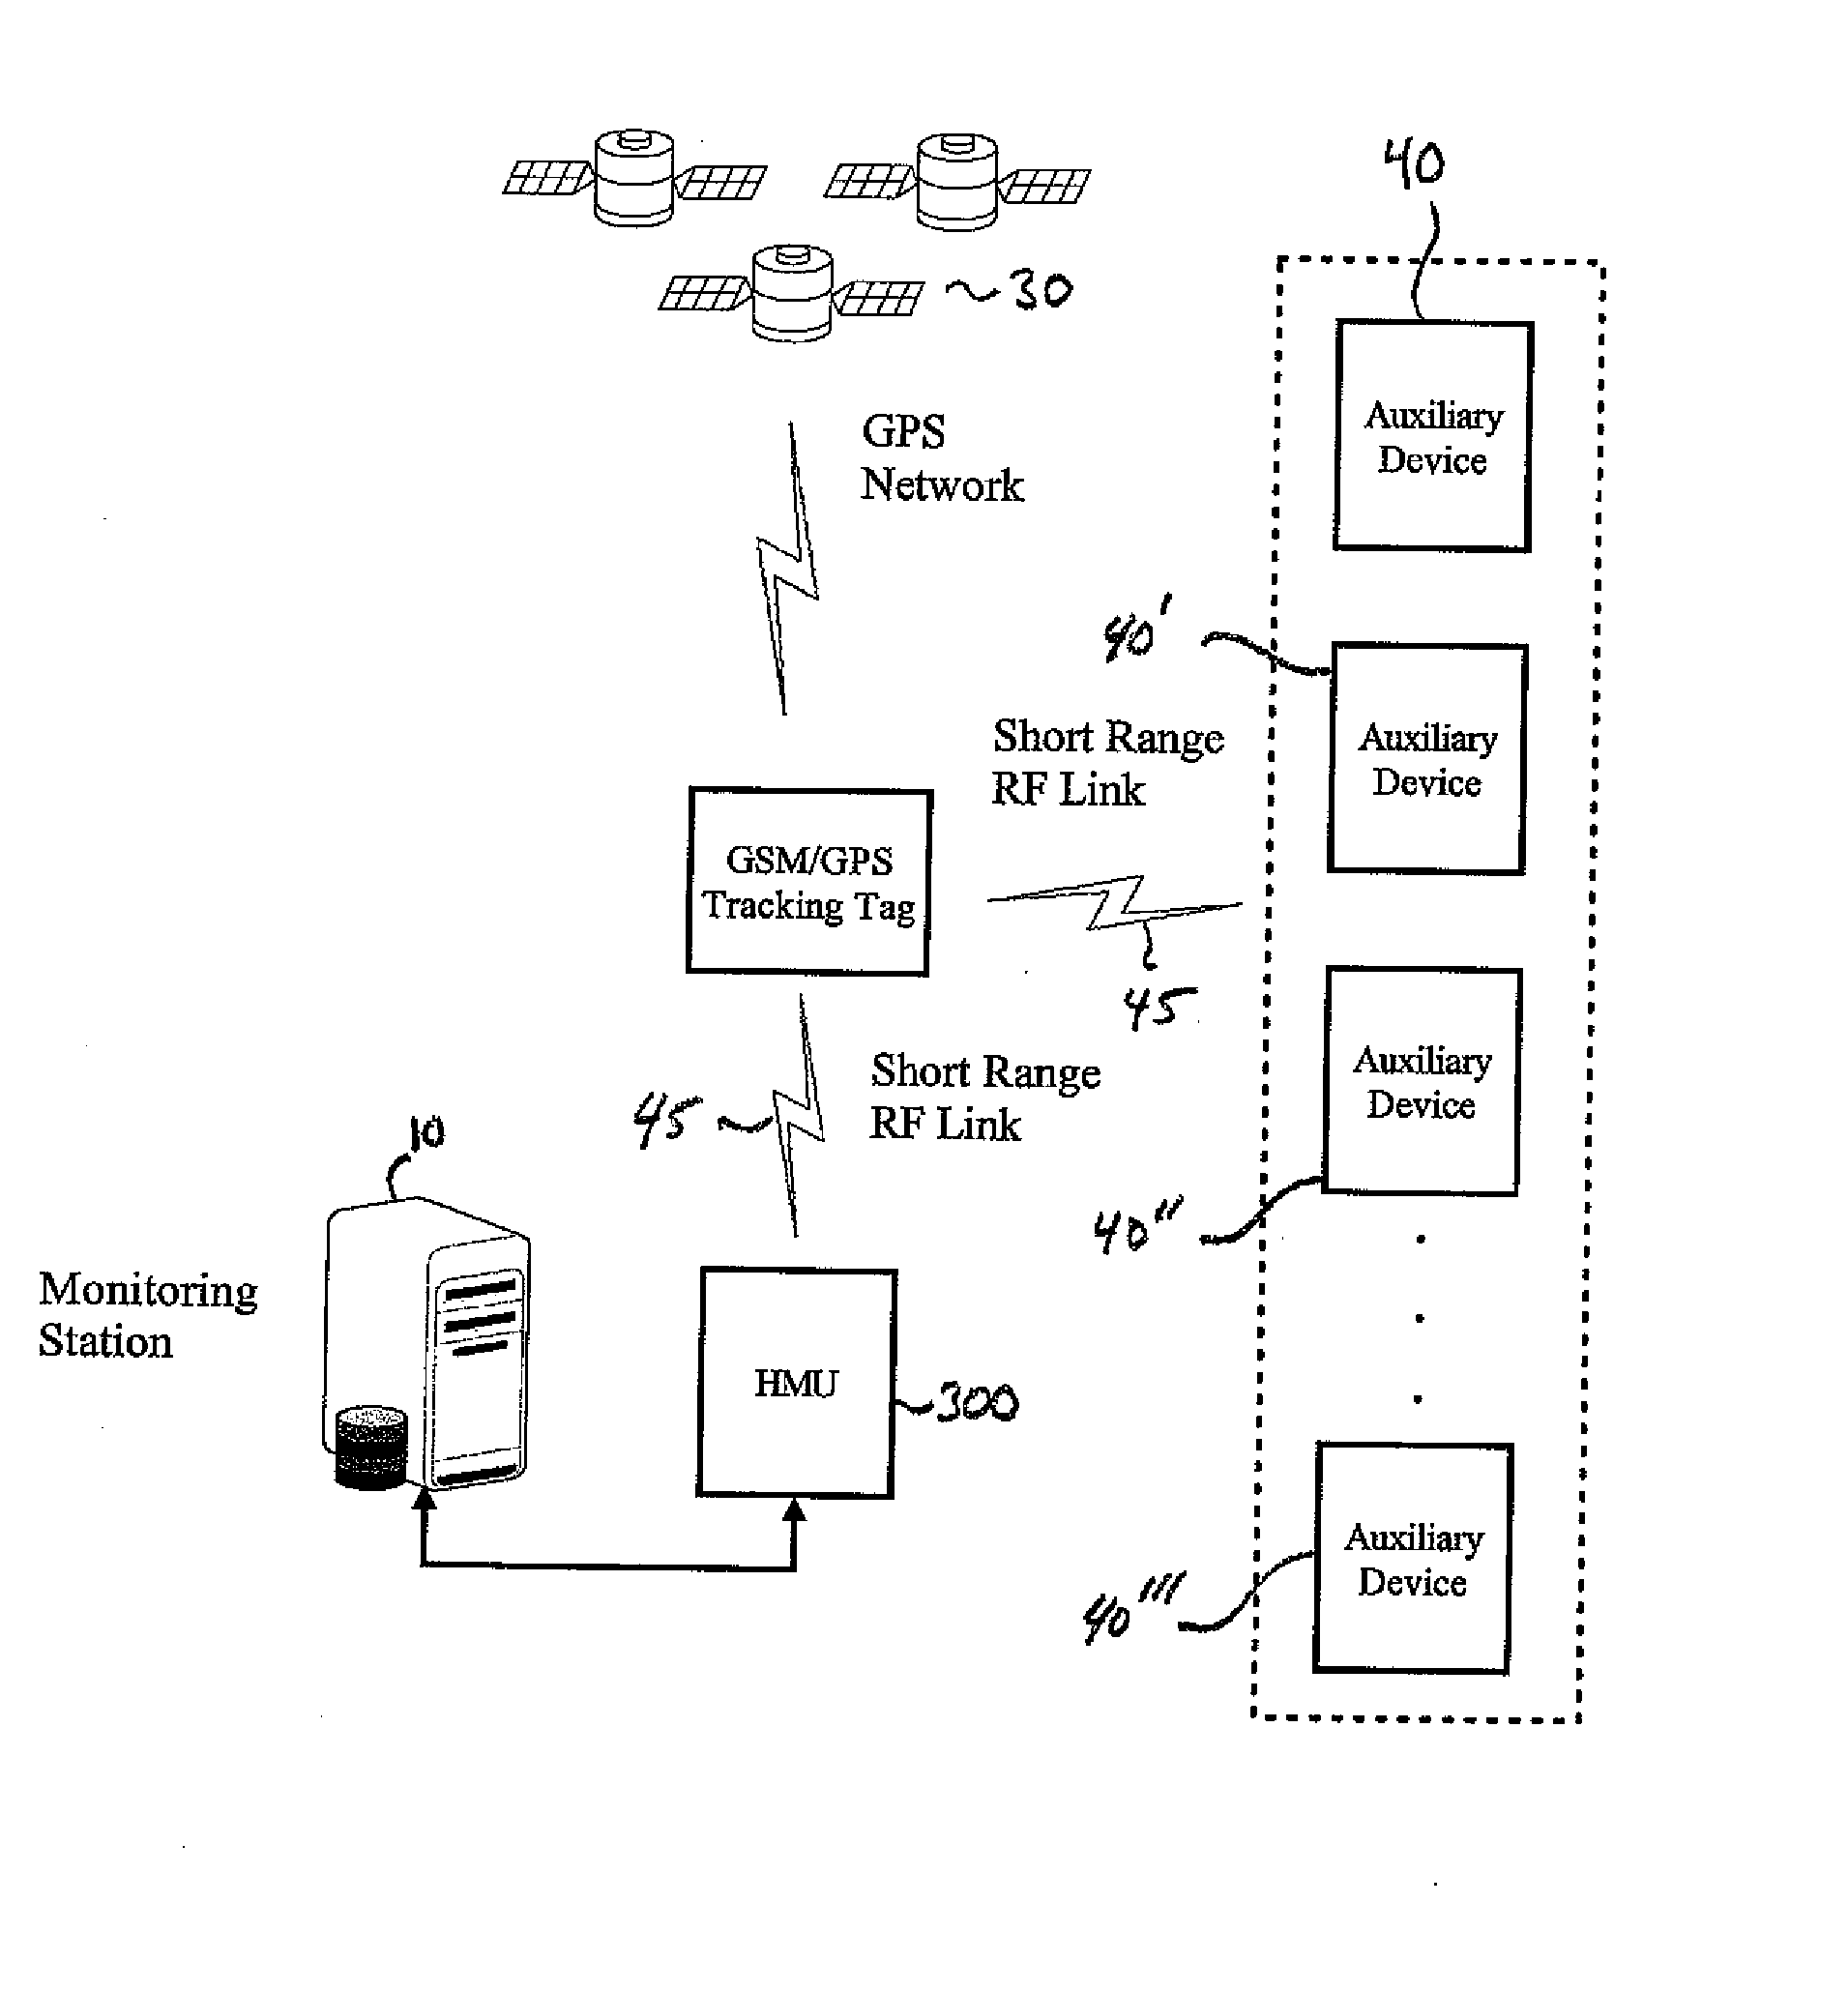 Wireless Tag And Auxiliary Device For Use With Home Monitoring Unit For Tracking Individuals or Objects